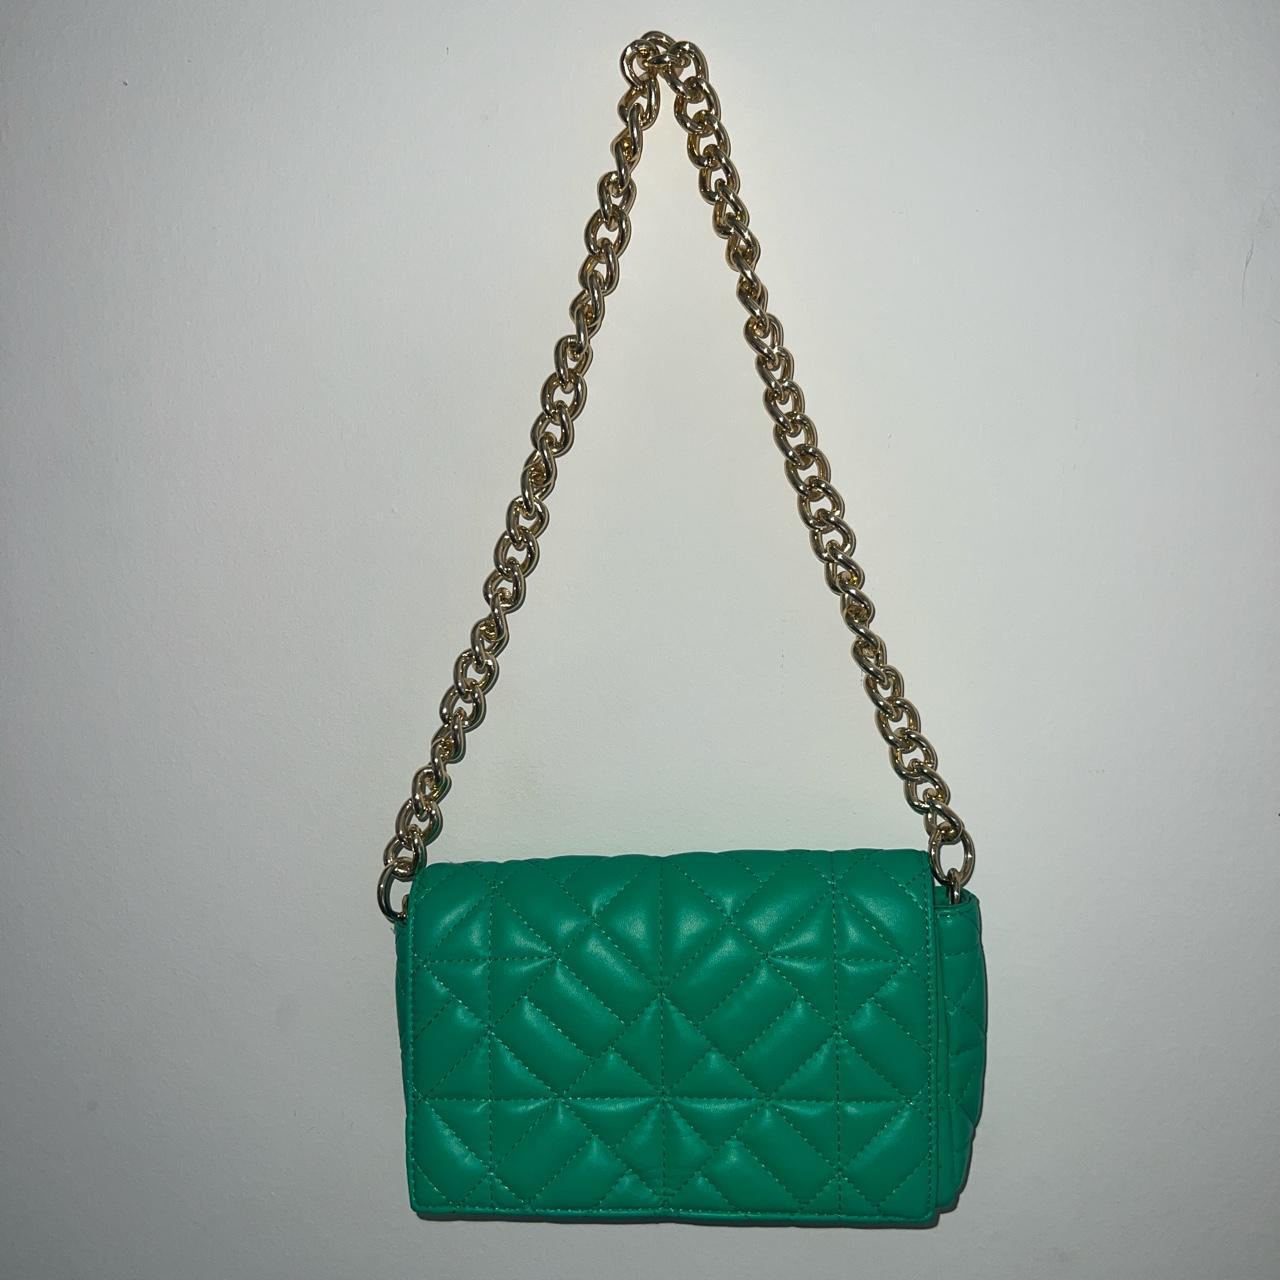 Josie_Leather_Bag_with_Studs_and_Chain_Strap_green_33_900x.jpg?v=1578381610